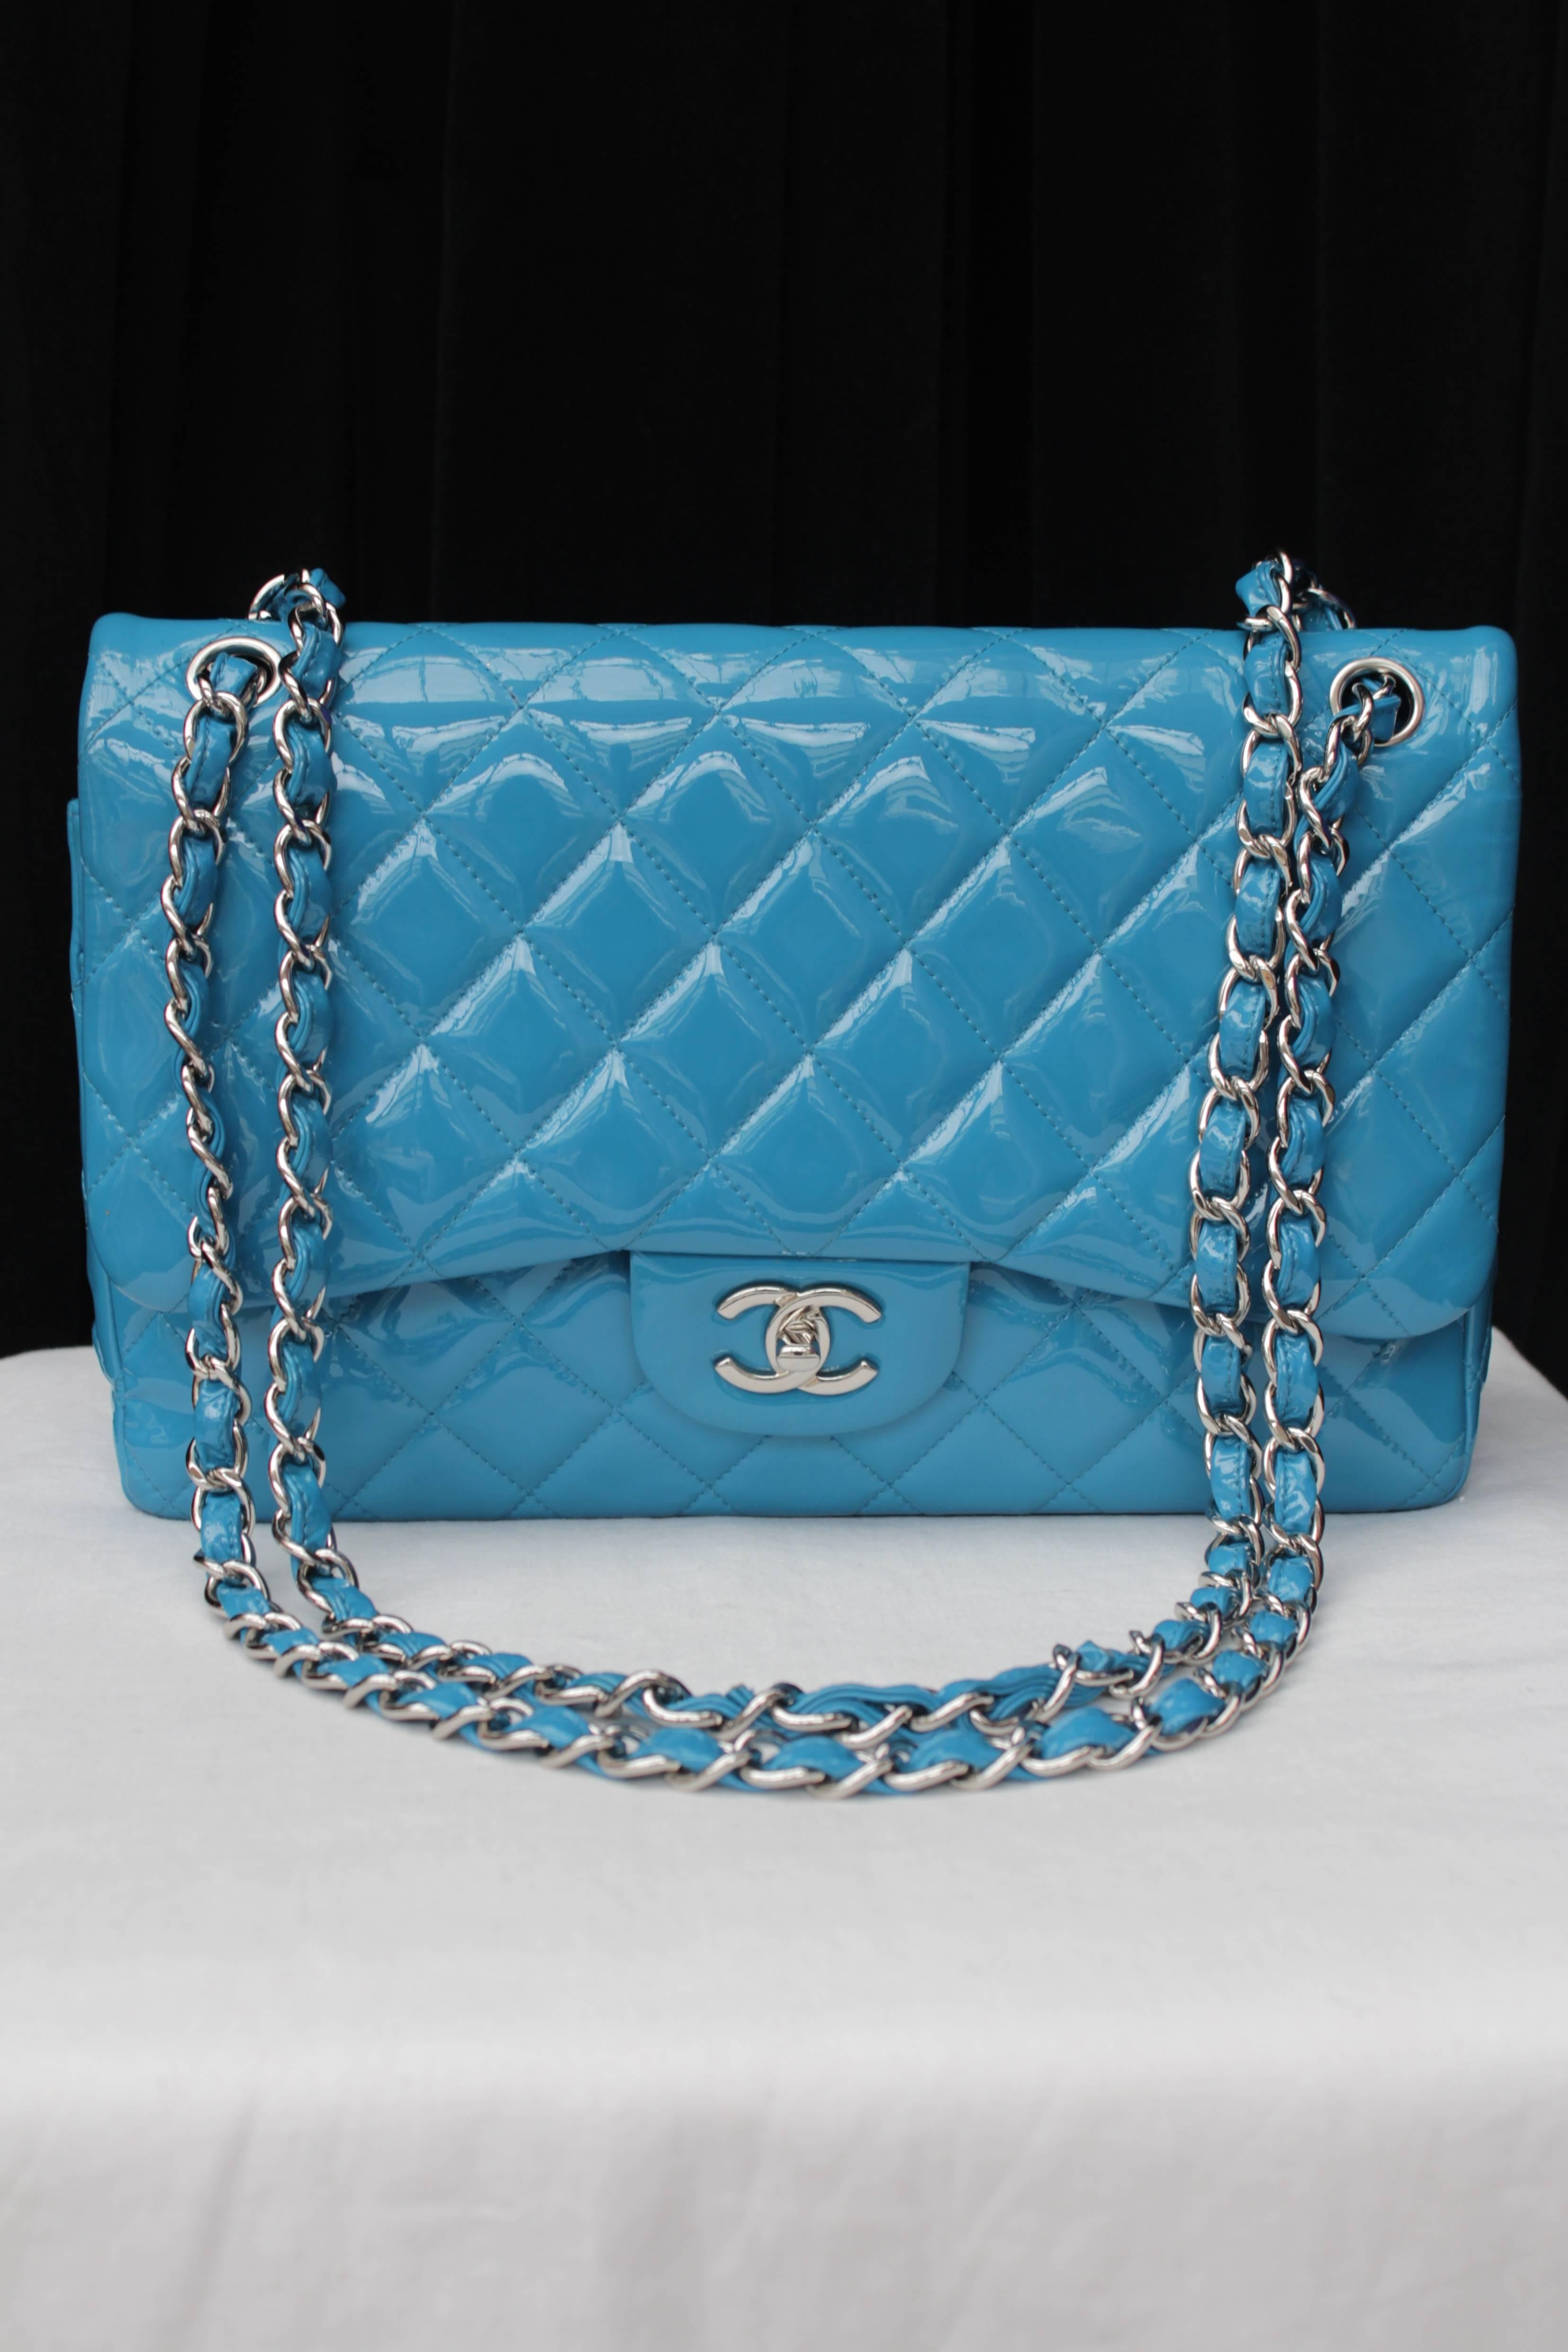 CHANEL (Made in France) Shoulder bag model timeless in a Jumbo size in turquoise patent quilted leather with a double flap closing with a silver metal CC turnlock. The bag also features a sliding double handle in leather interlaced with silver metal